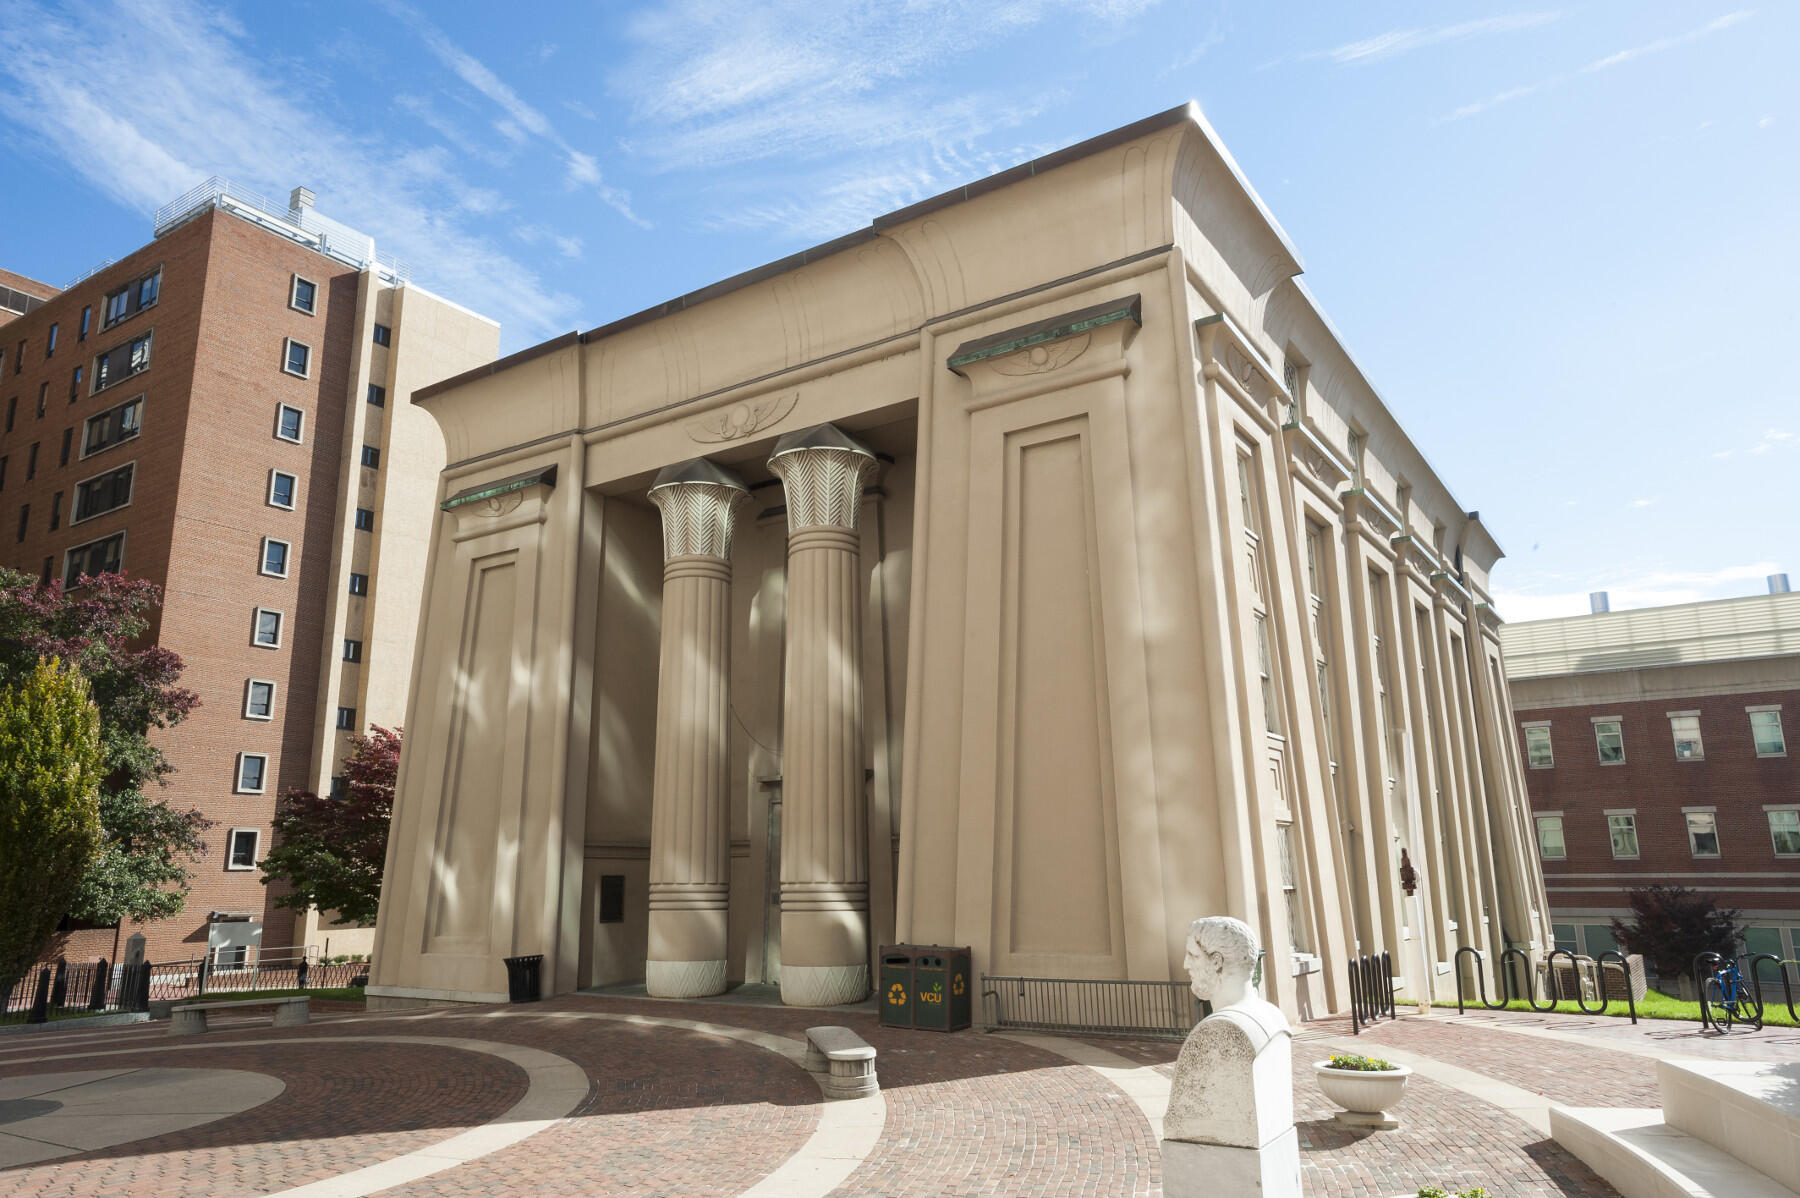 The state landmark Egyptian Building is considered one of the nation’s best examples of the Egyptian Revival architectural style. (Photo by Lindy Rodman, University Relations)